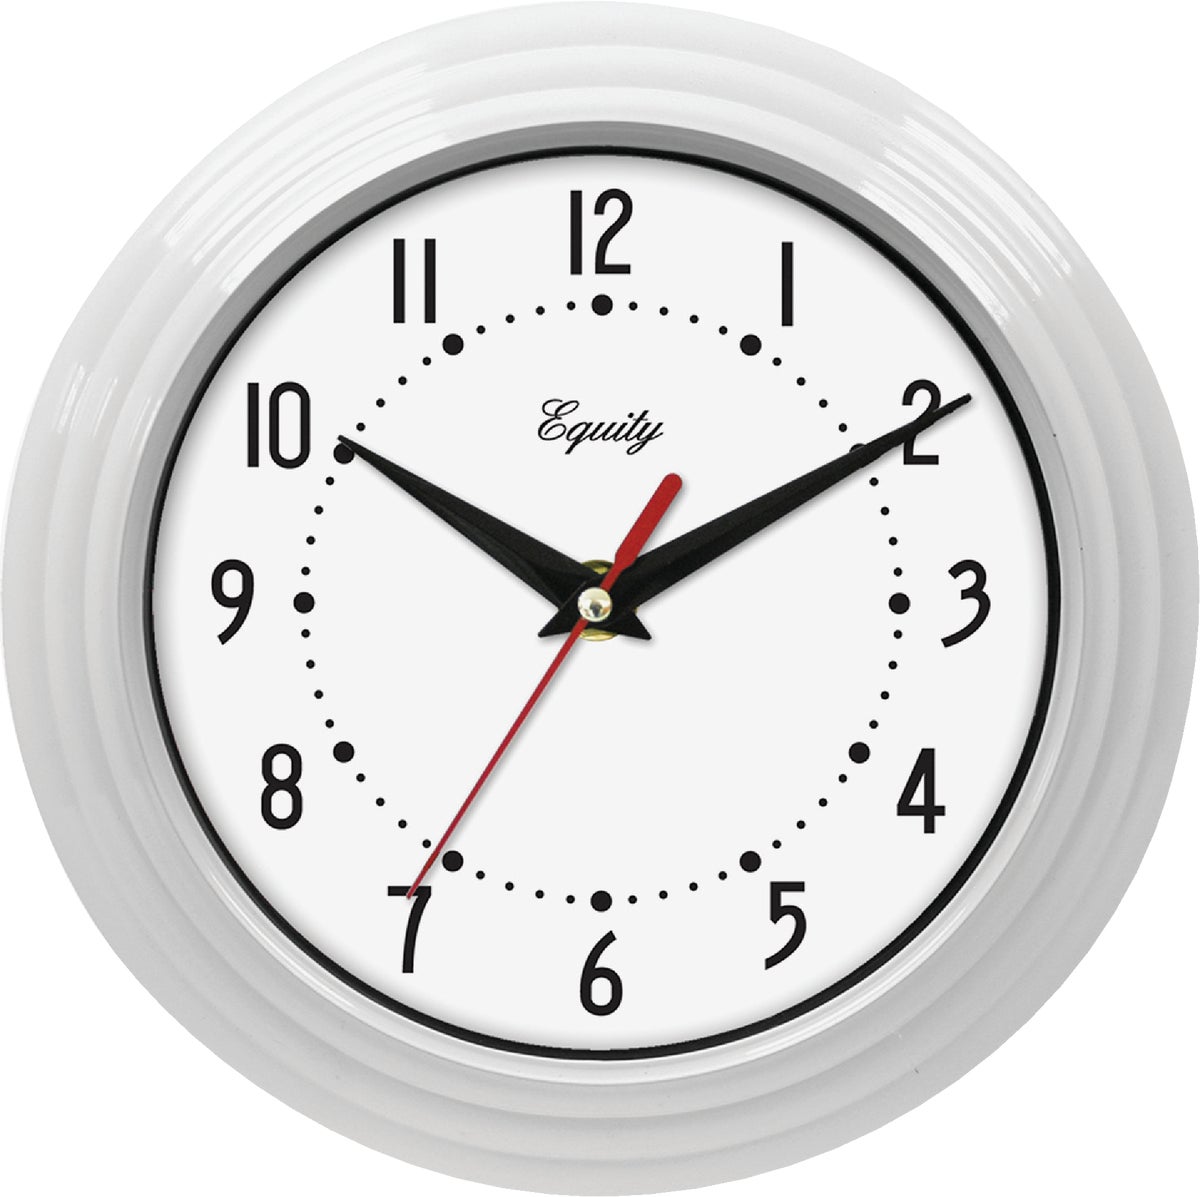 Equity by La Crosse 29007 8 inch In/Out Thermometer Metallic (Grey) Silver Wall Clock